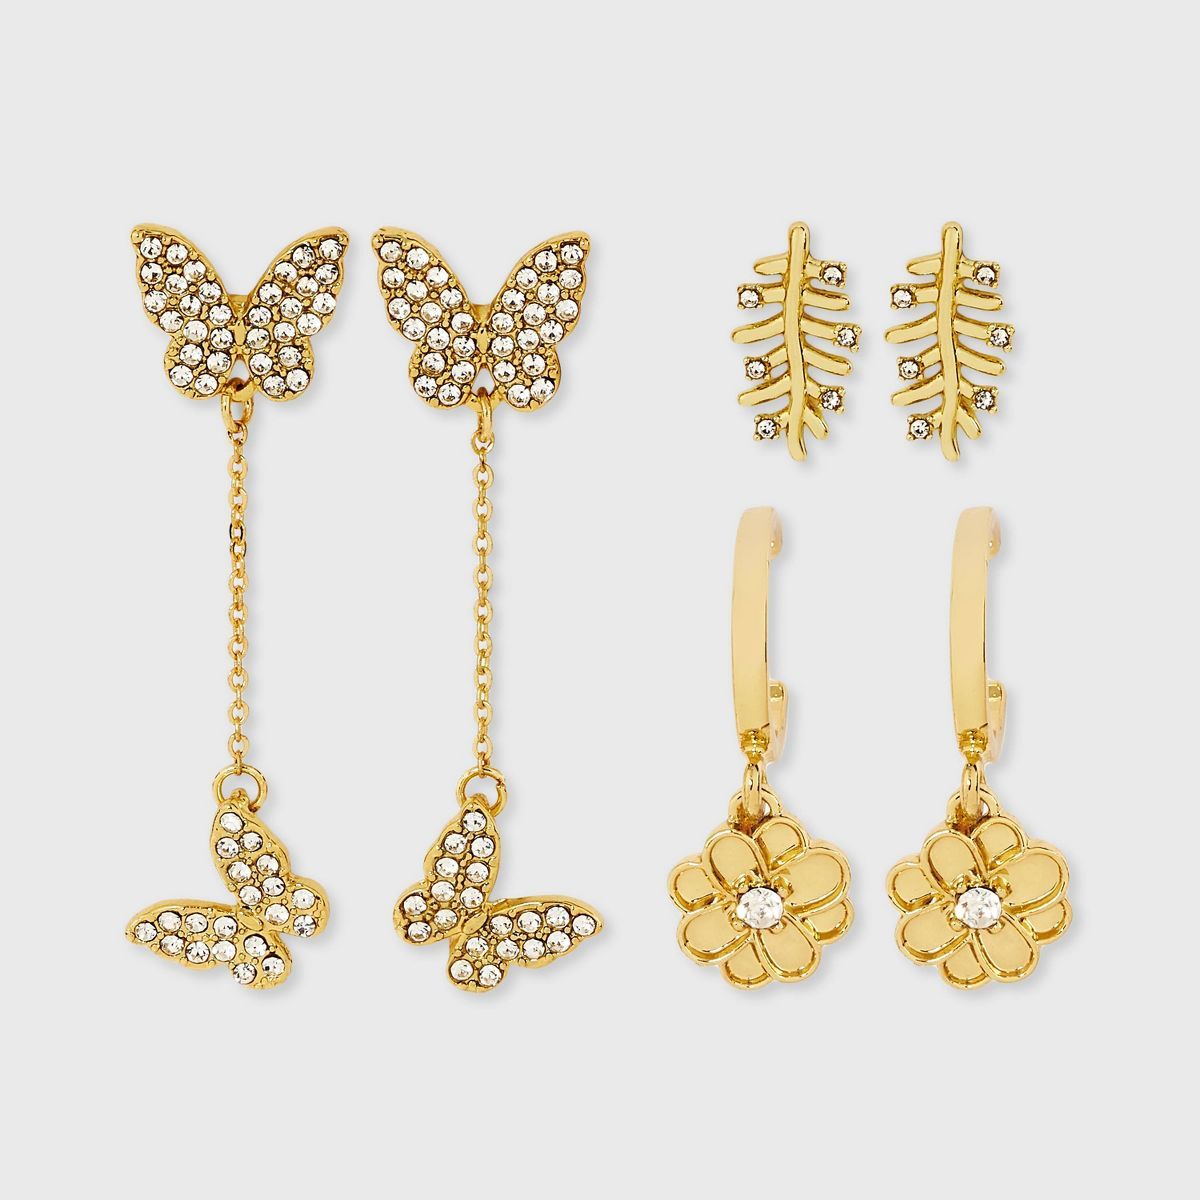 SUGARFIX by BaubleBar Floral Friends Earring Set 3pc - Gold | Target